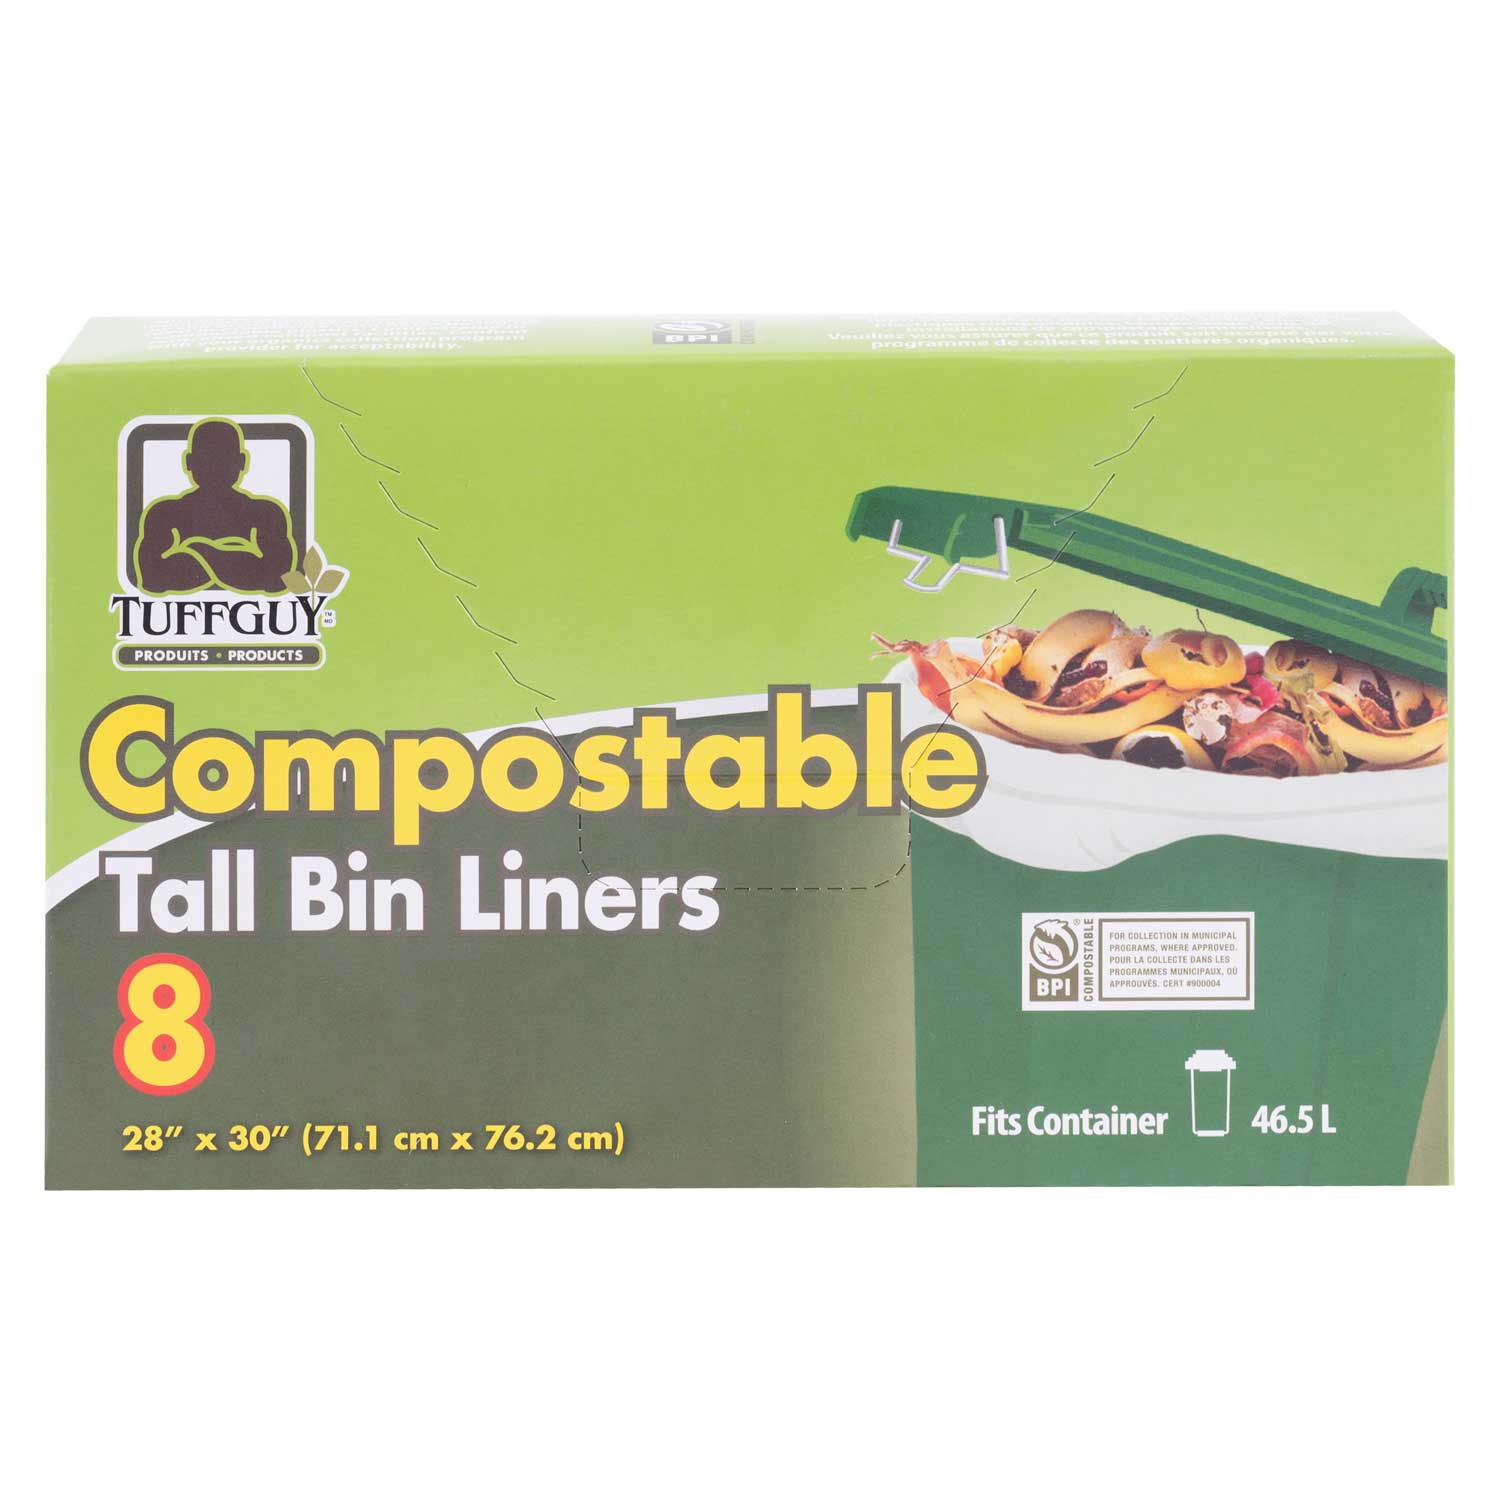 Tuff Guy - Compostable tall bags for bin liners, pk. of 8 - 46.5L